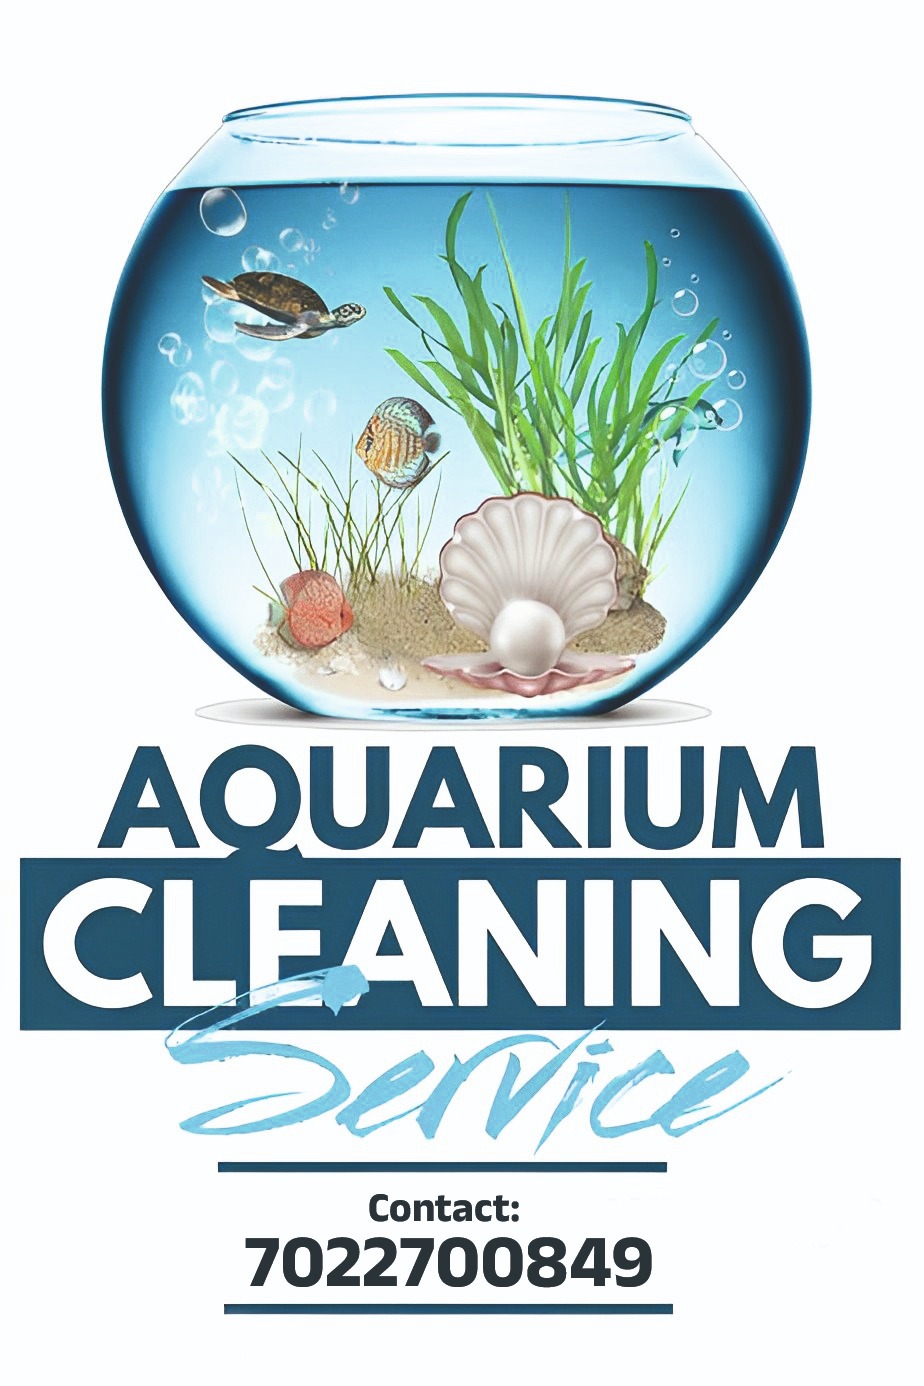 Karthik Rst on X: We Provides professional Aquarium Cleaning Services in  Bangalore.offers the aquariums cleaning services for at an affordable cost  book and Take appointments to clean your aquariums cleaning services at